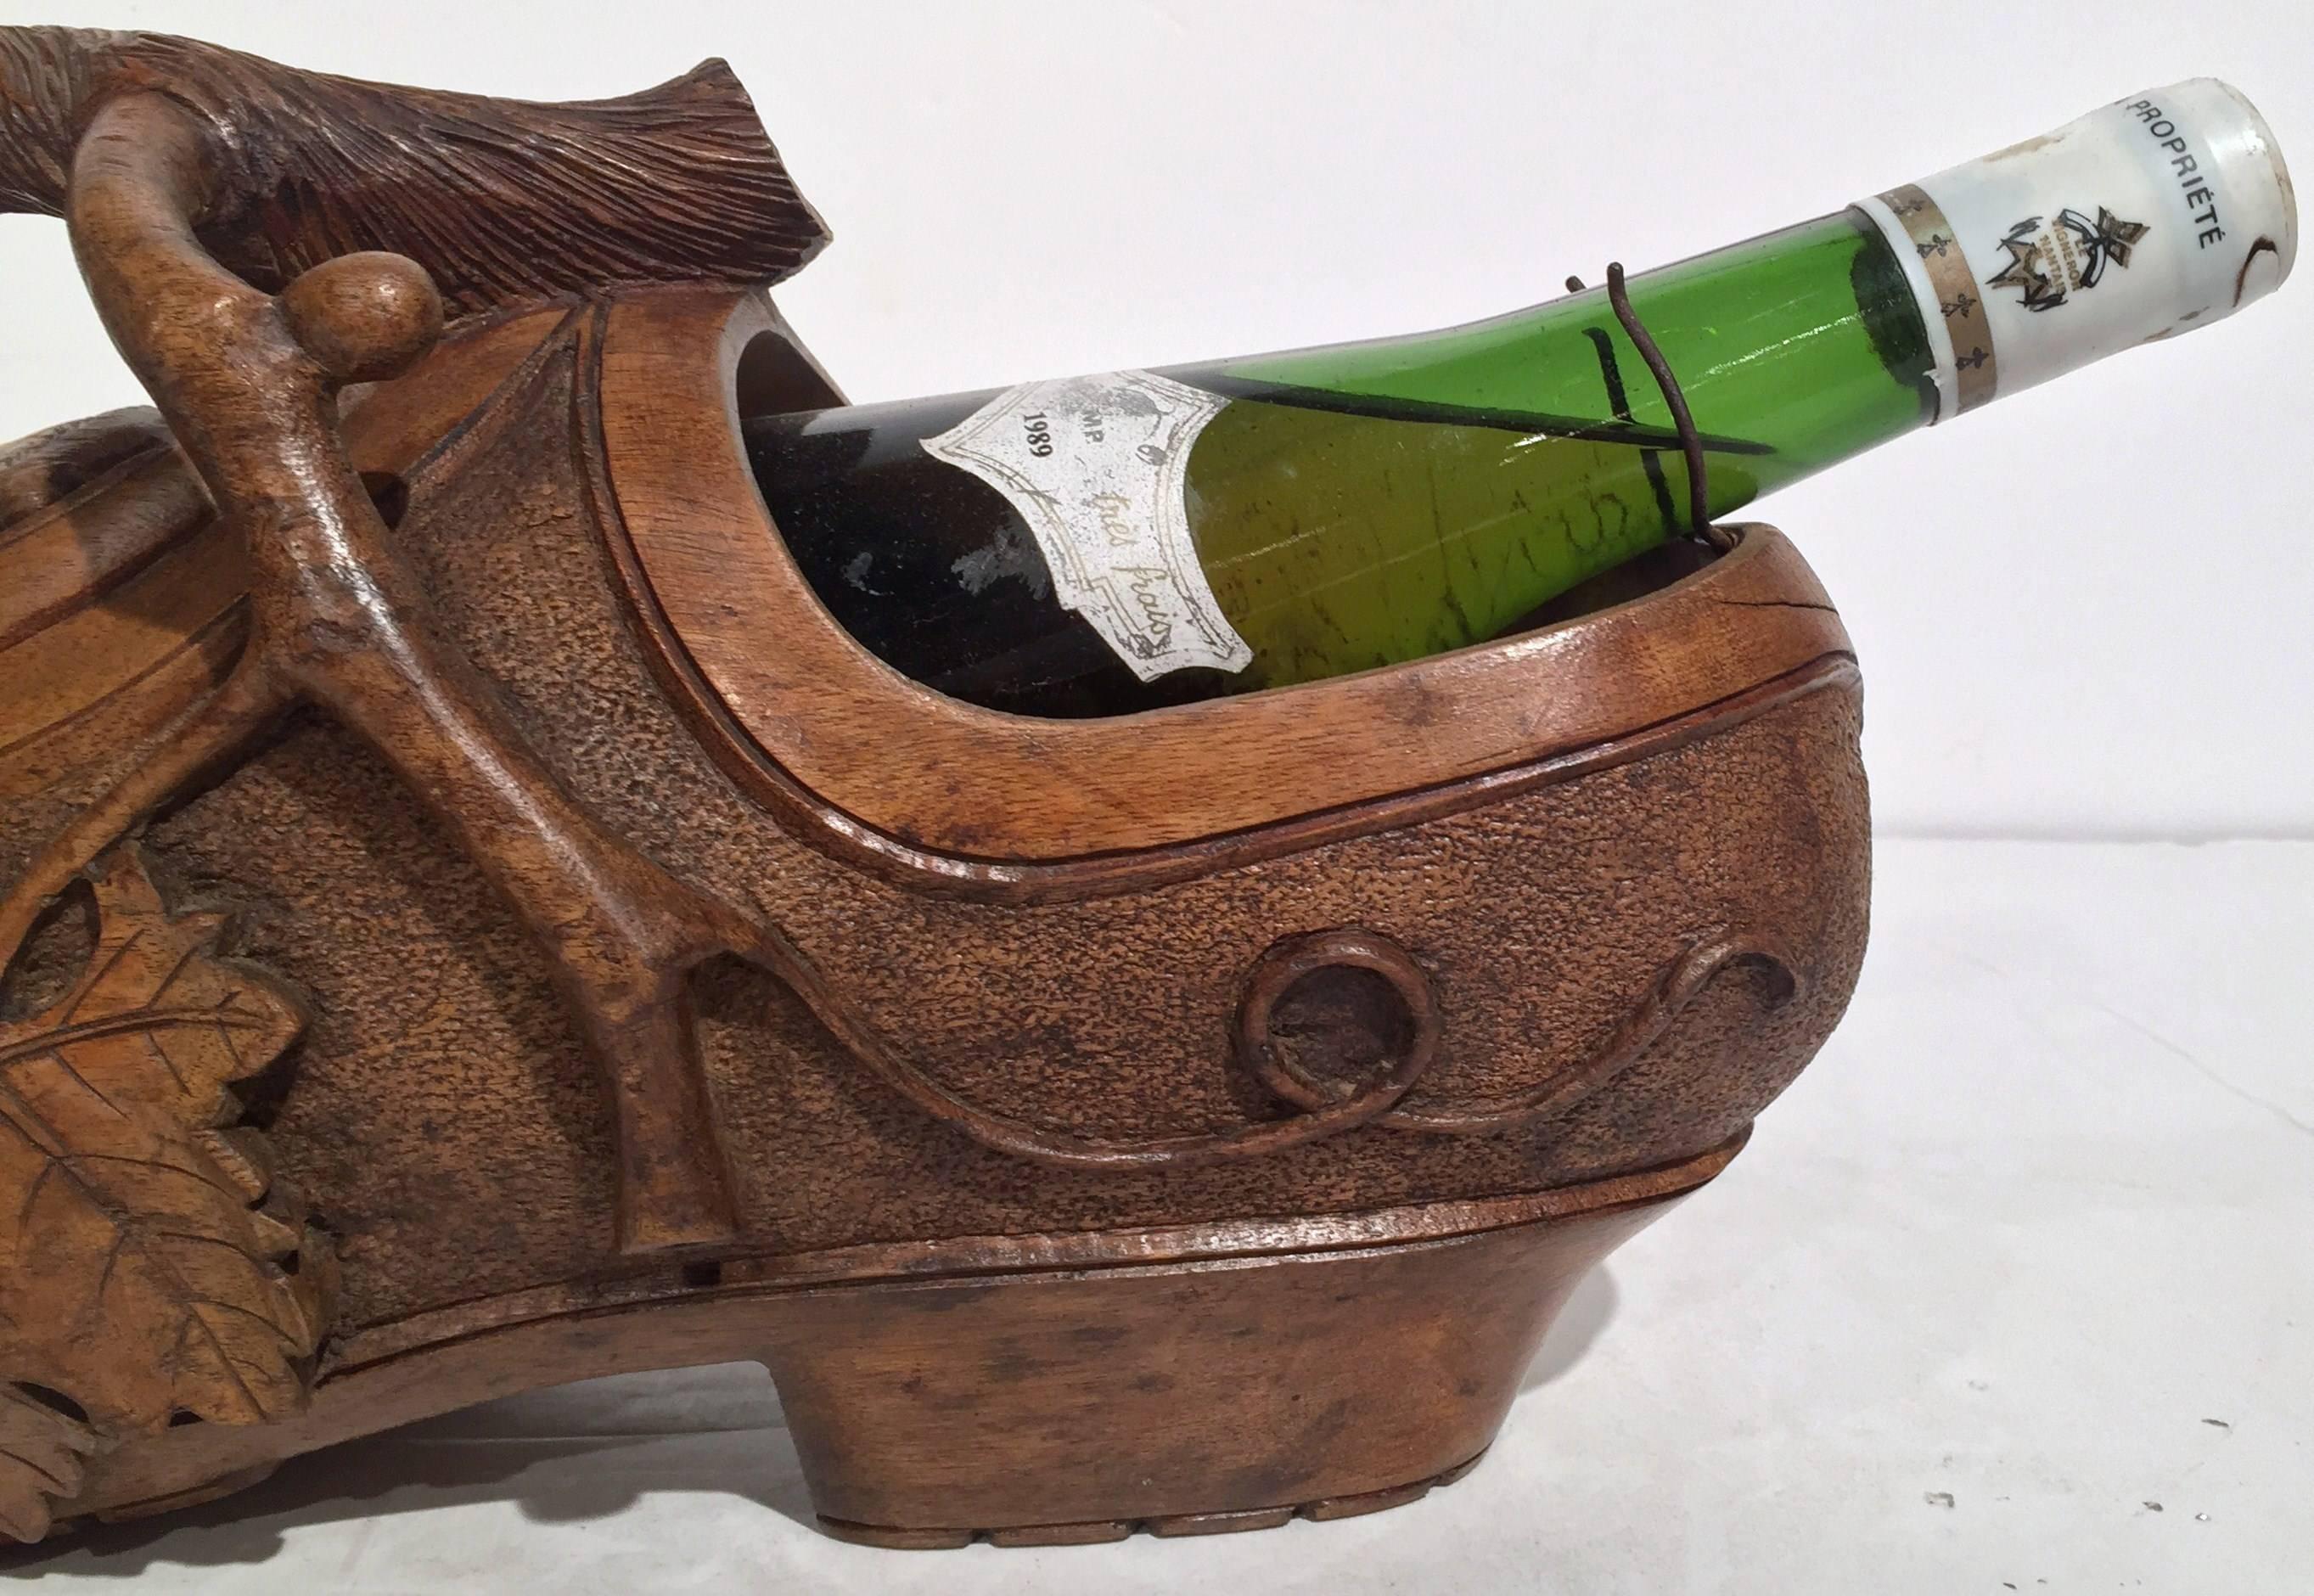 Black Forest Early 20th Century French Carved Walnut Wine Bottle Holder Clog with Vine Decor For Sale